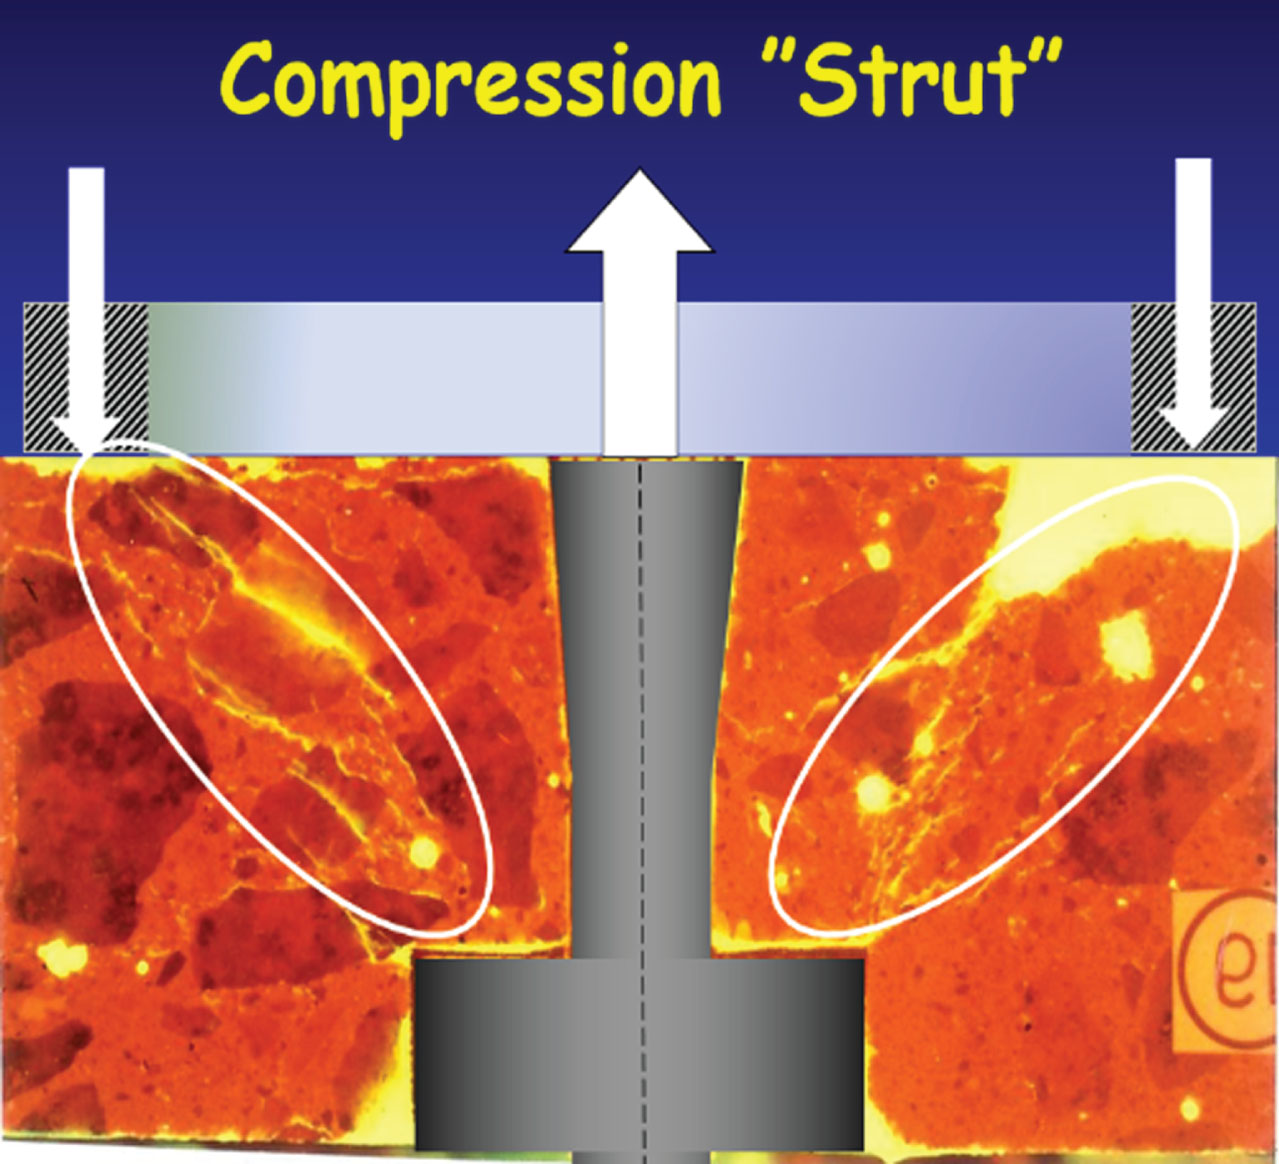 Parallel microcracking in the “strut”, stage 2.